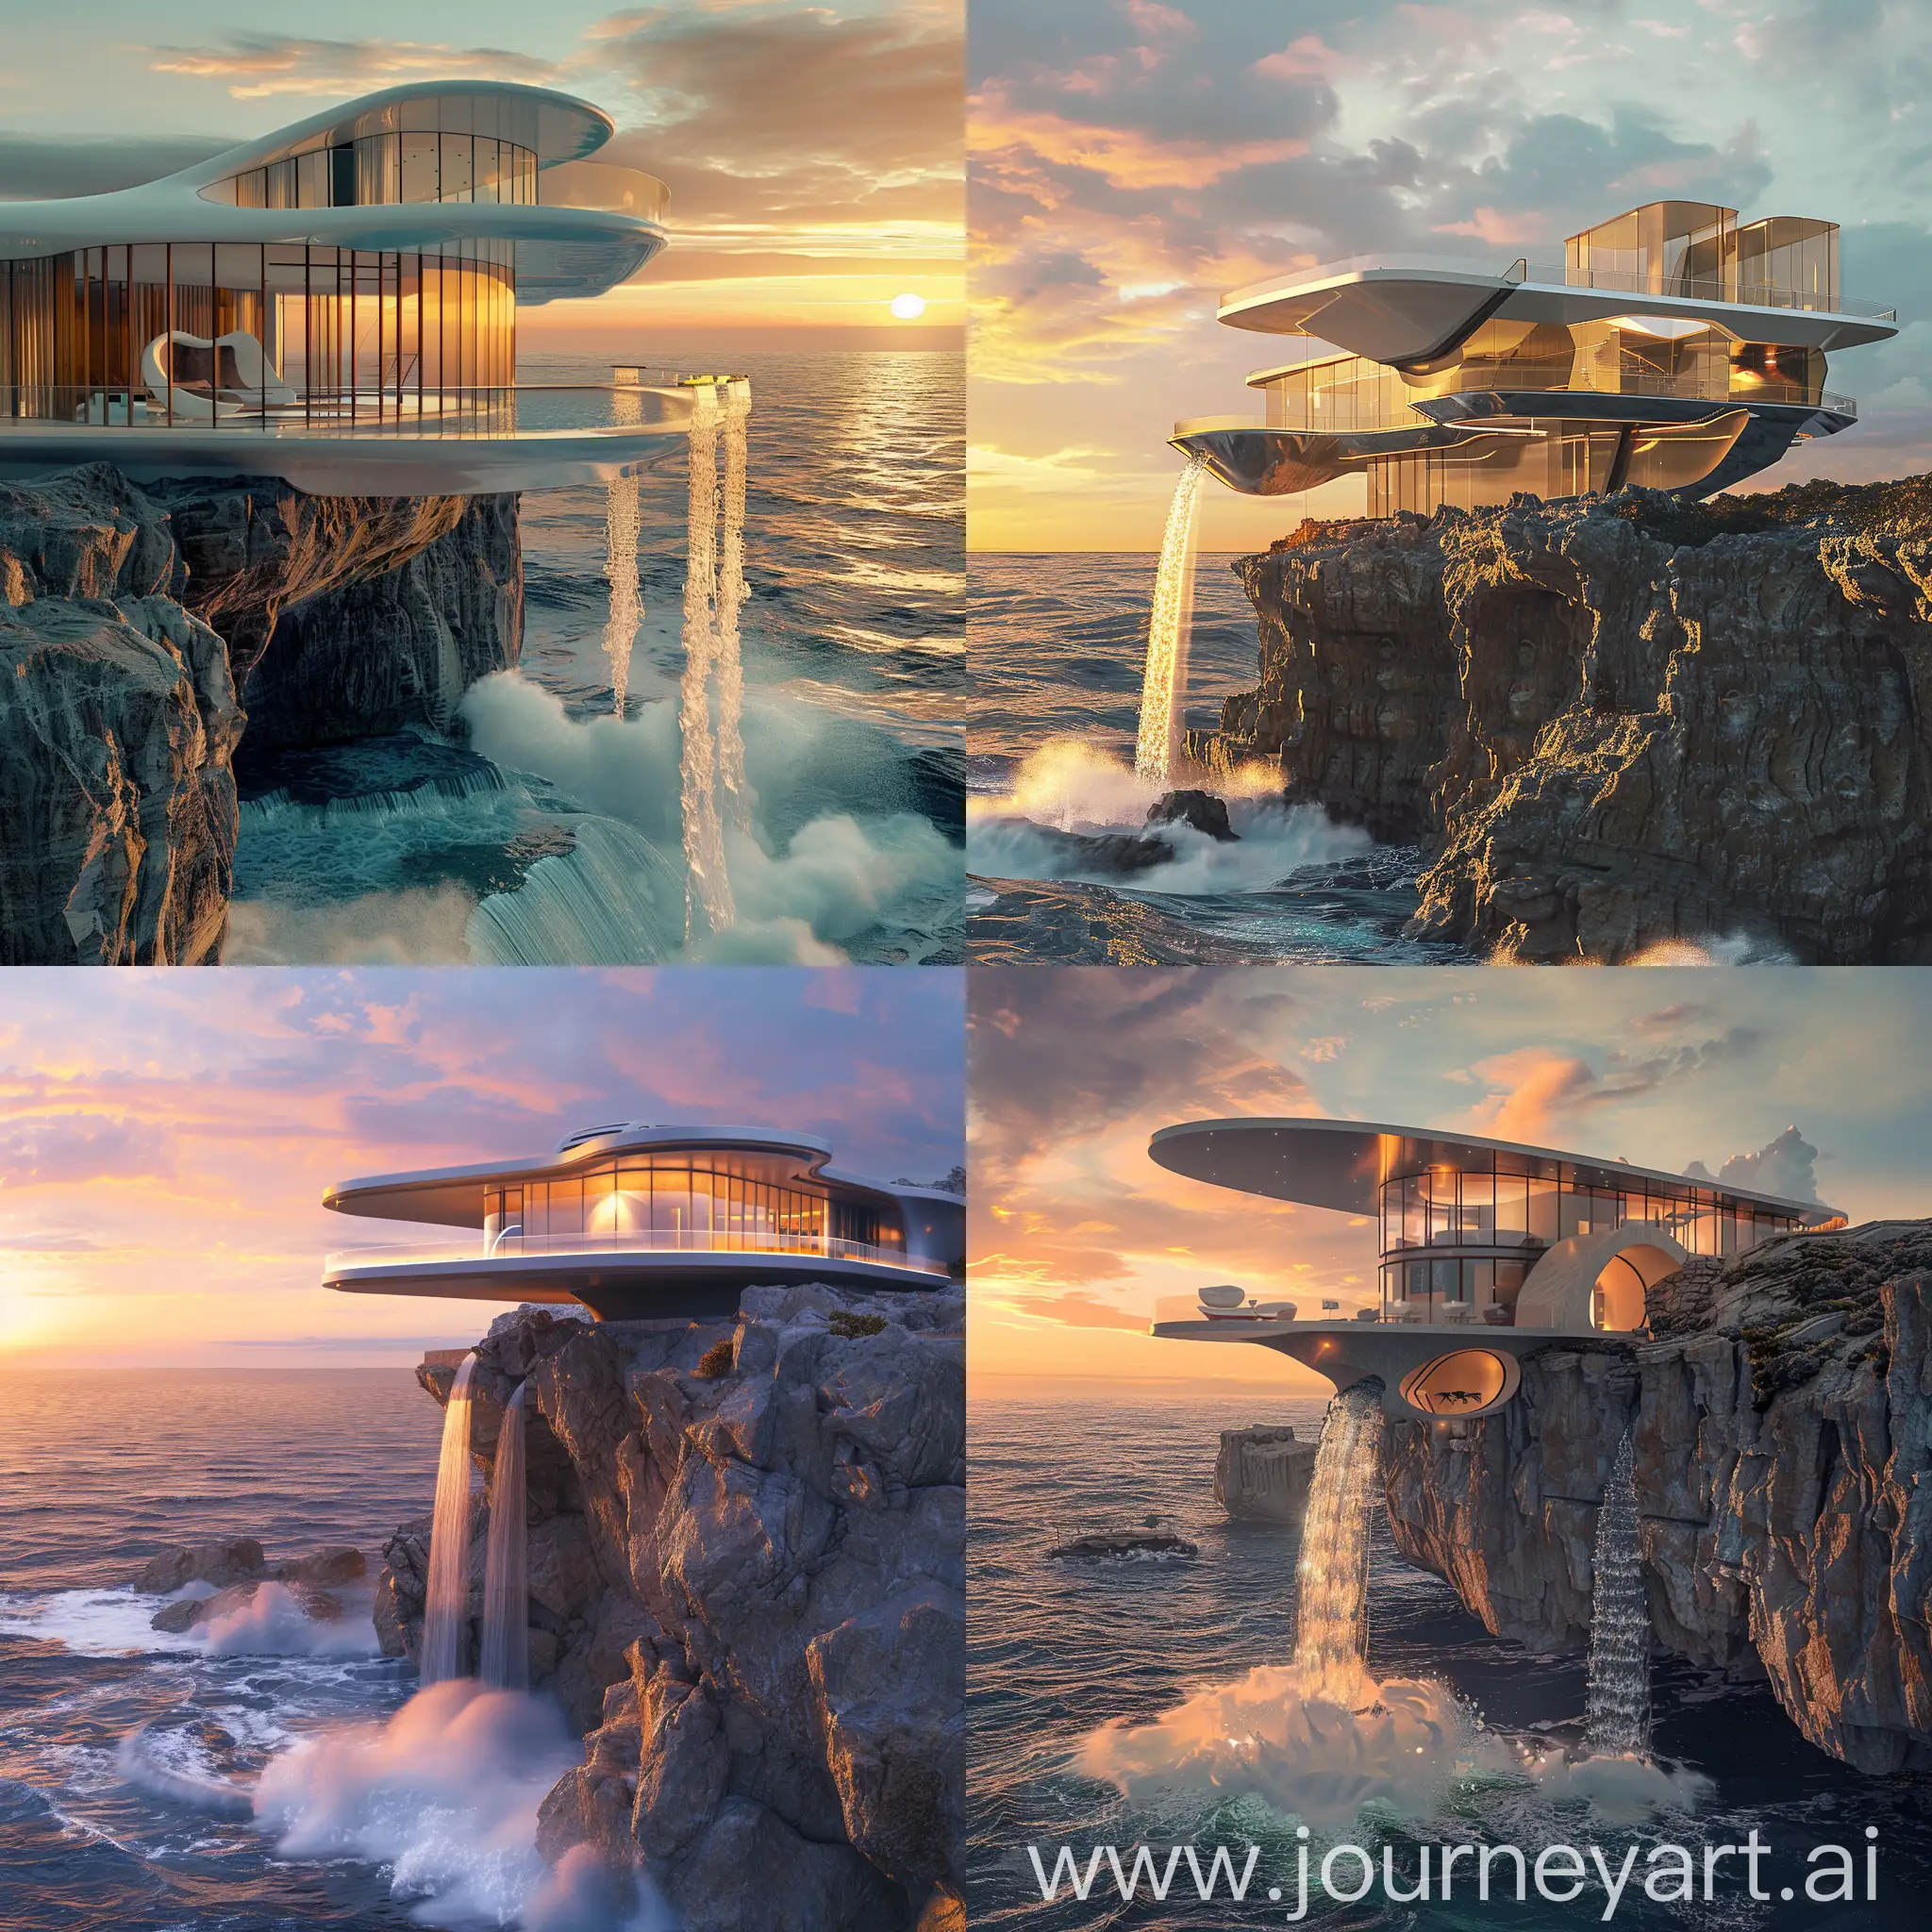 Futuristic-Glass-Cliff-House-with-Waterfall-Overlooking-Ocean-Waves-at-Sunset